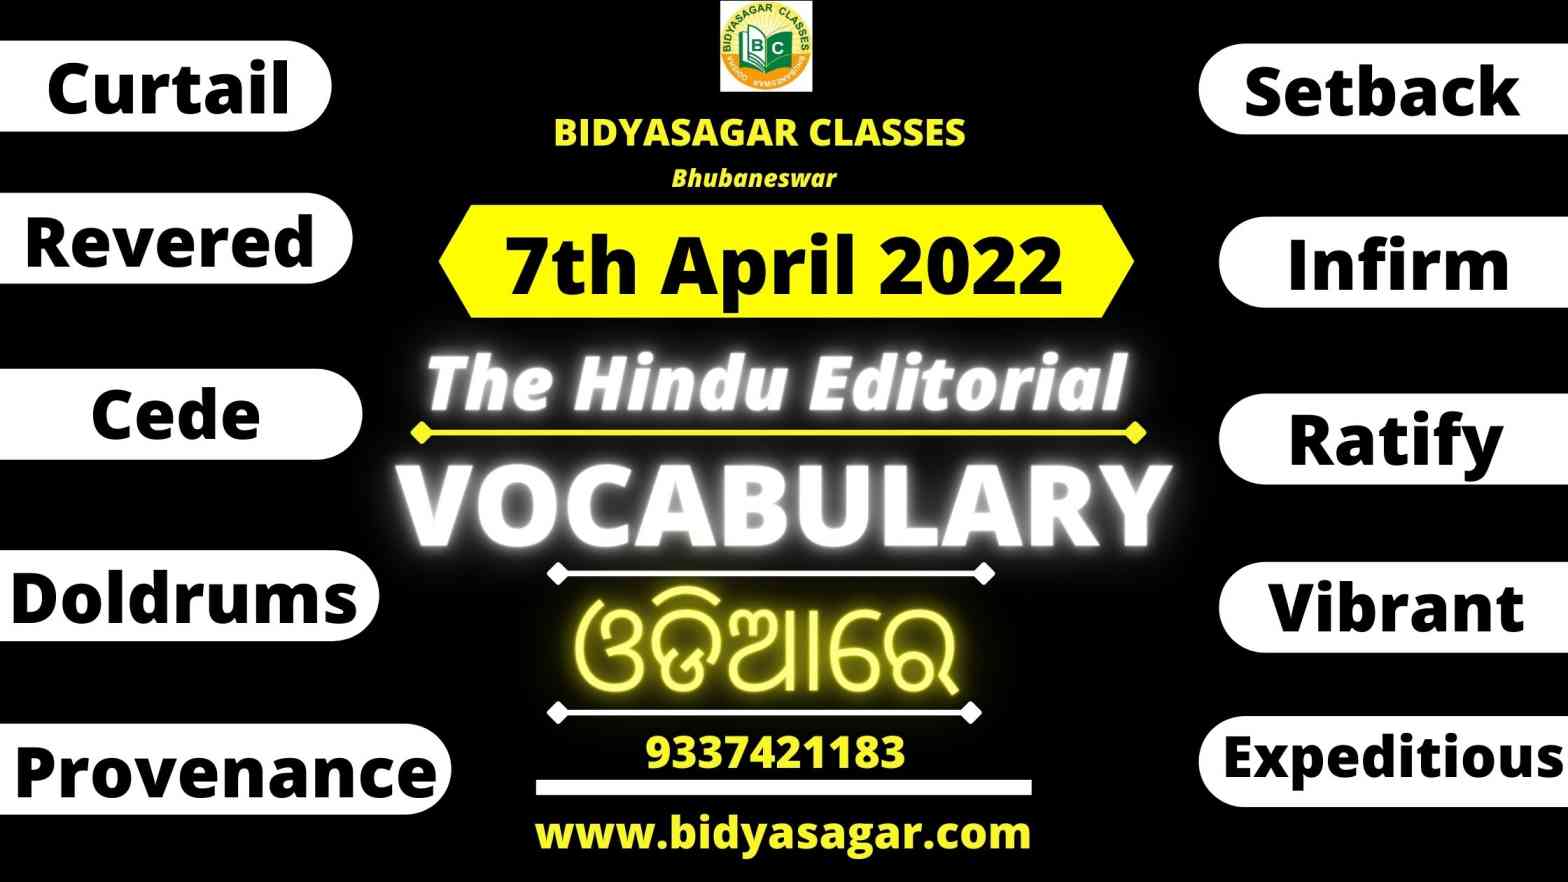 The Hindu Editorial Vocabulary of 7th April 2022